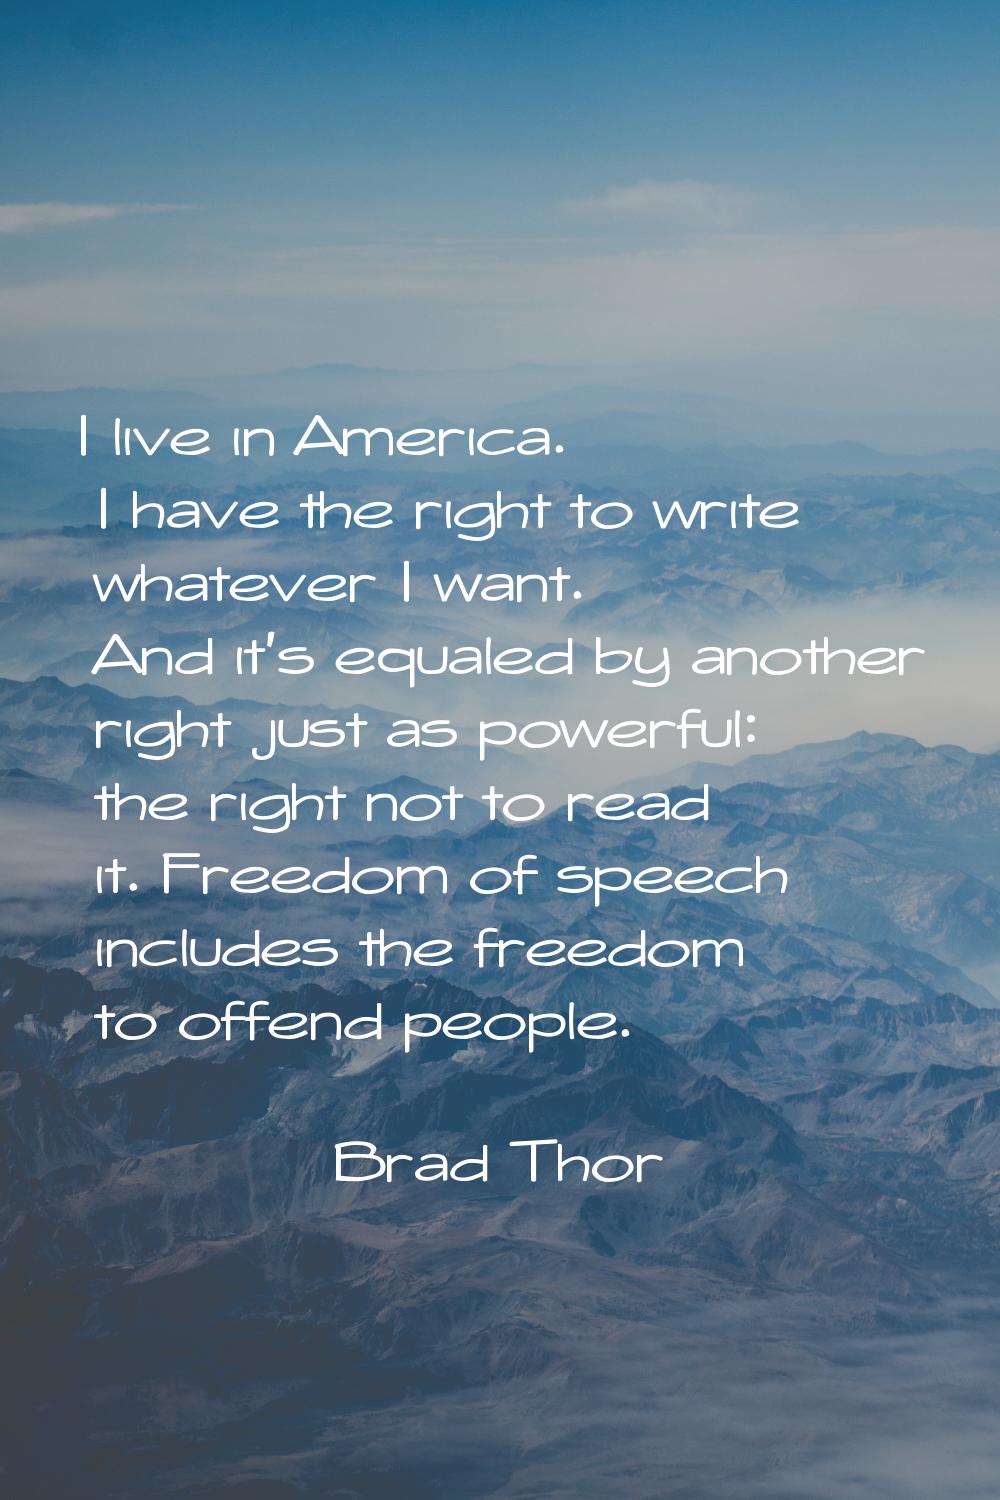 I live in America. I have the right to write whatever I want. And it's equaled by another right jus